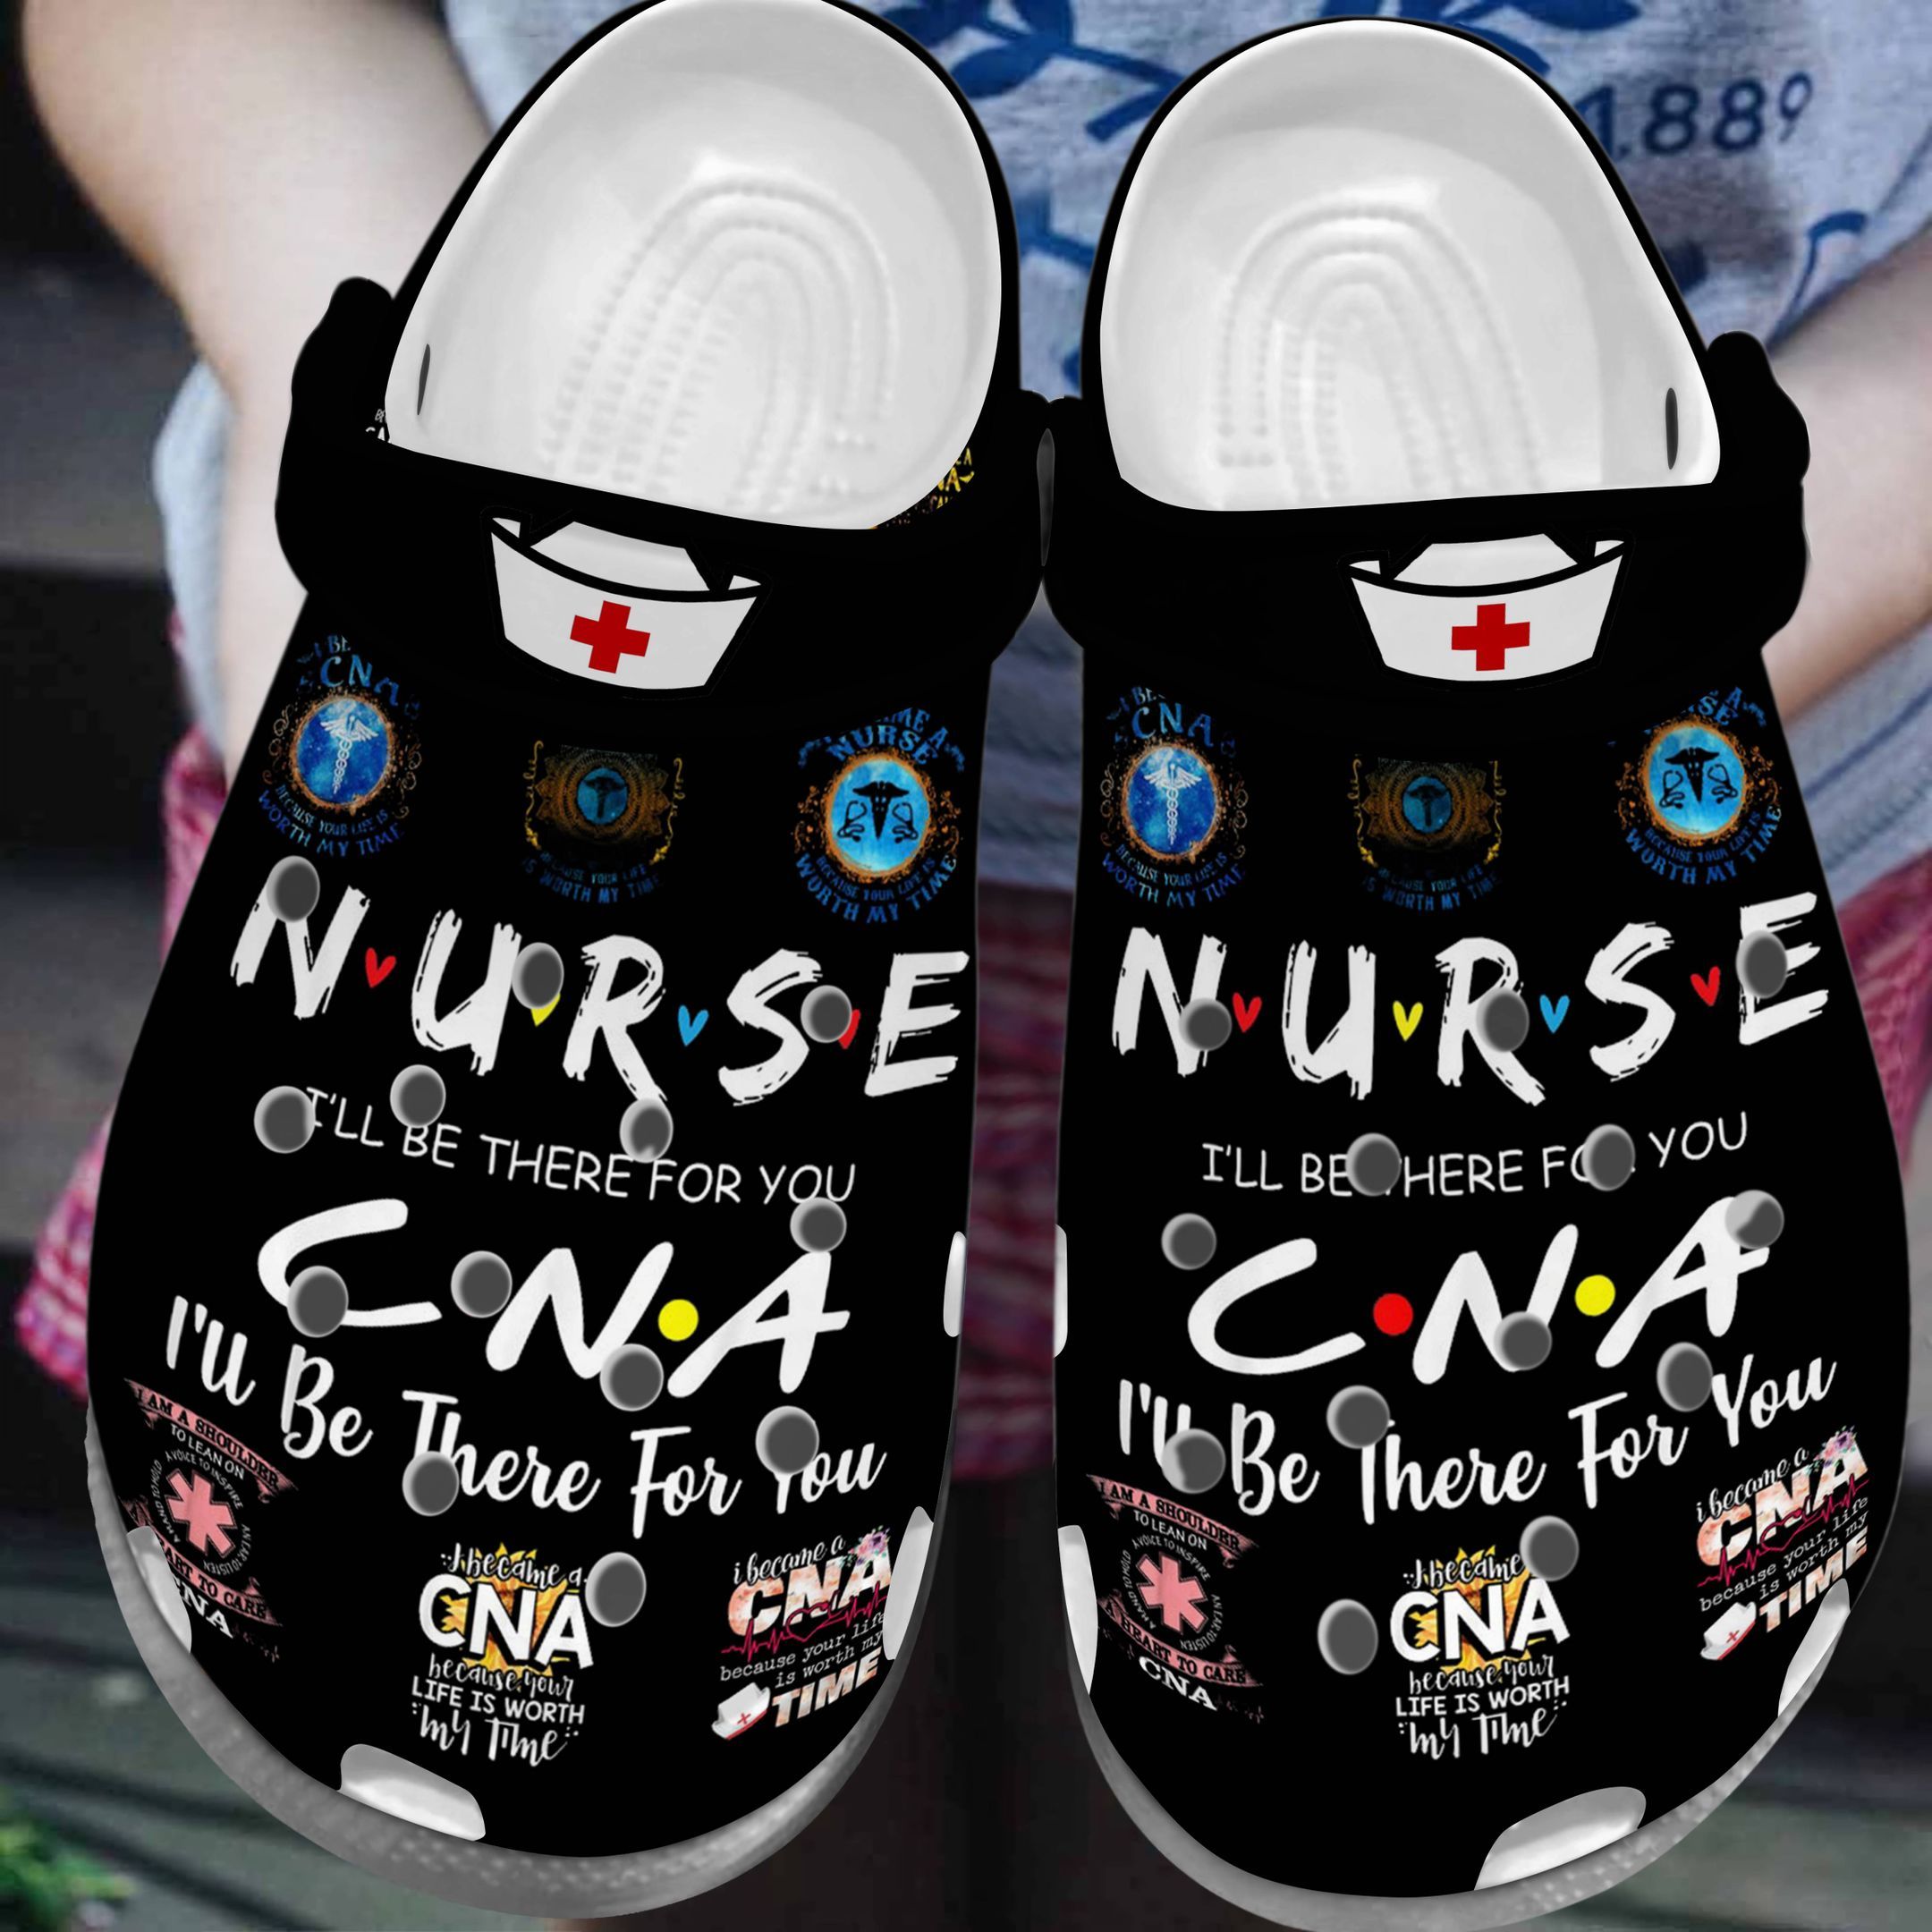 I’Ll Be There For You Cna Shoes – Nurse Crocbland Clog Birthday Gift ...